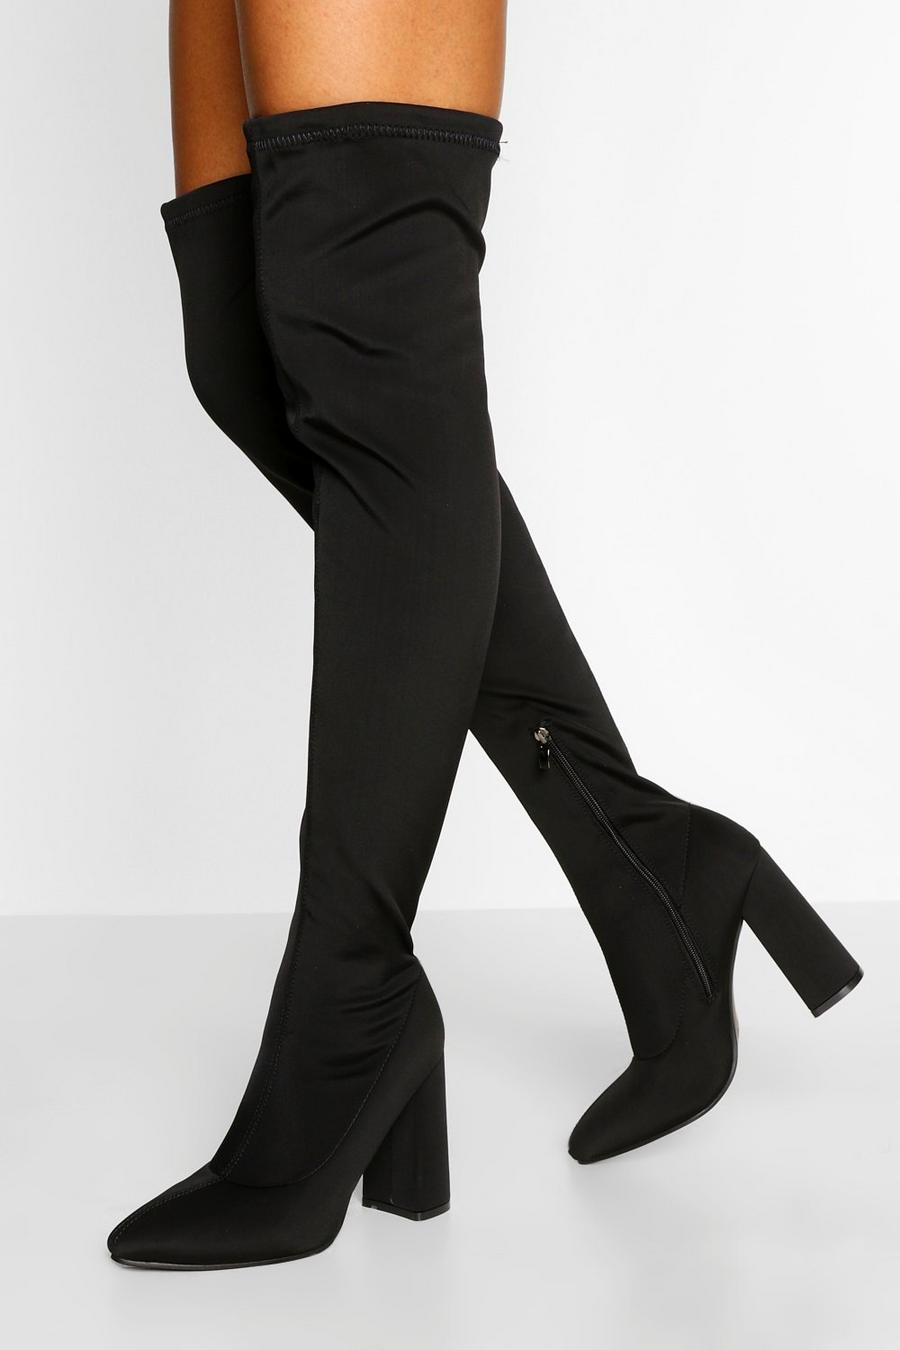 Black Stretch Thigh High Block Heel Boots image number 1